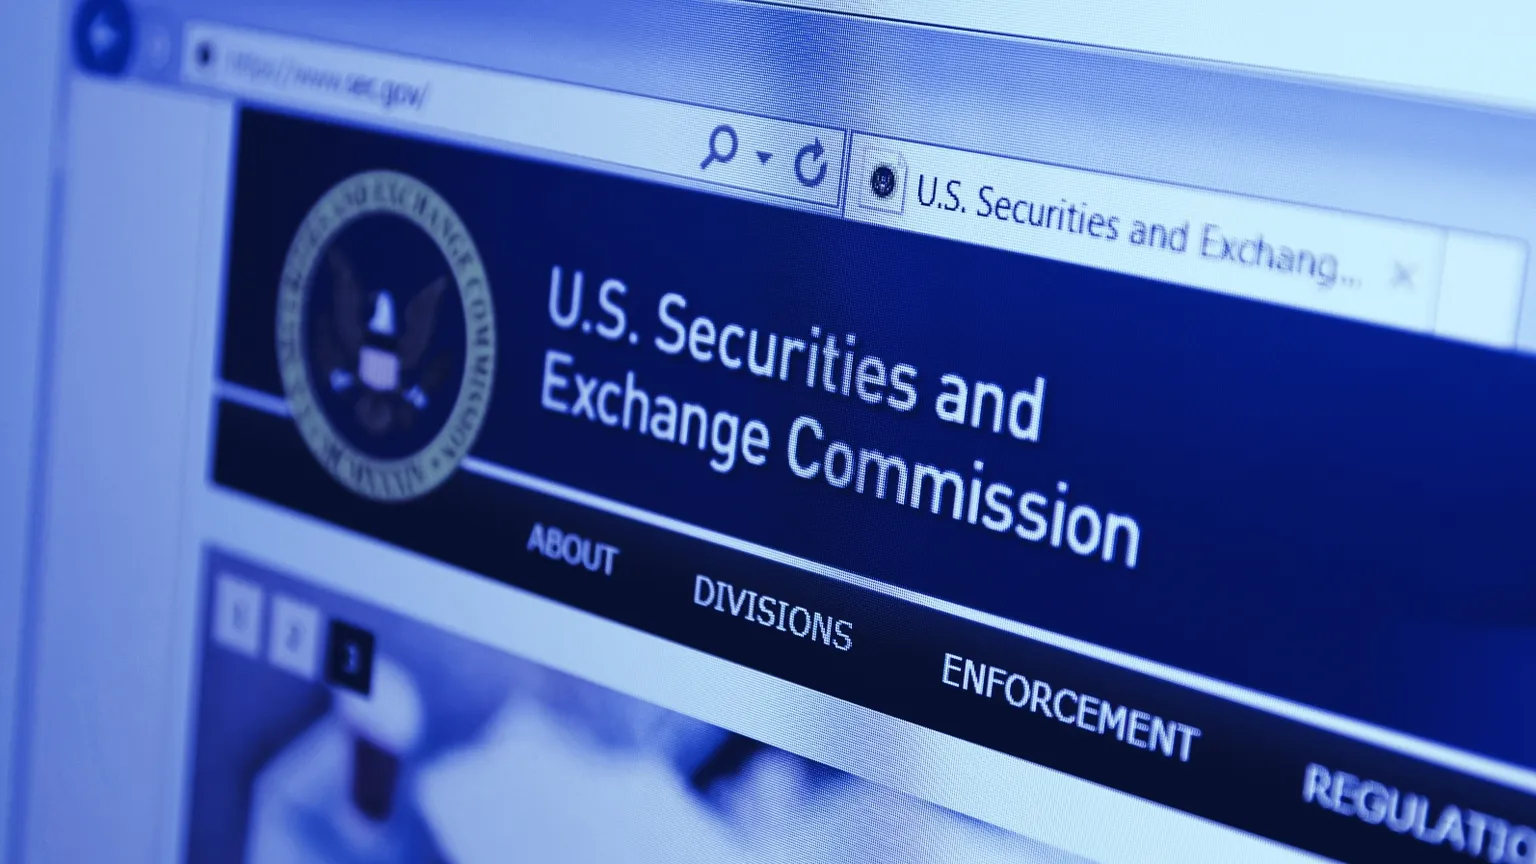 The US Securities and Exchange Commission. Image: Shutterstock